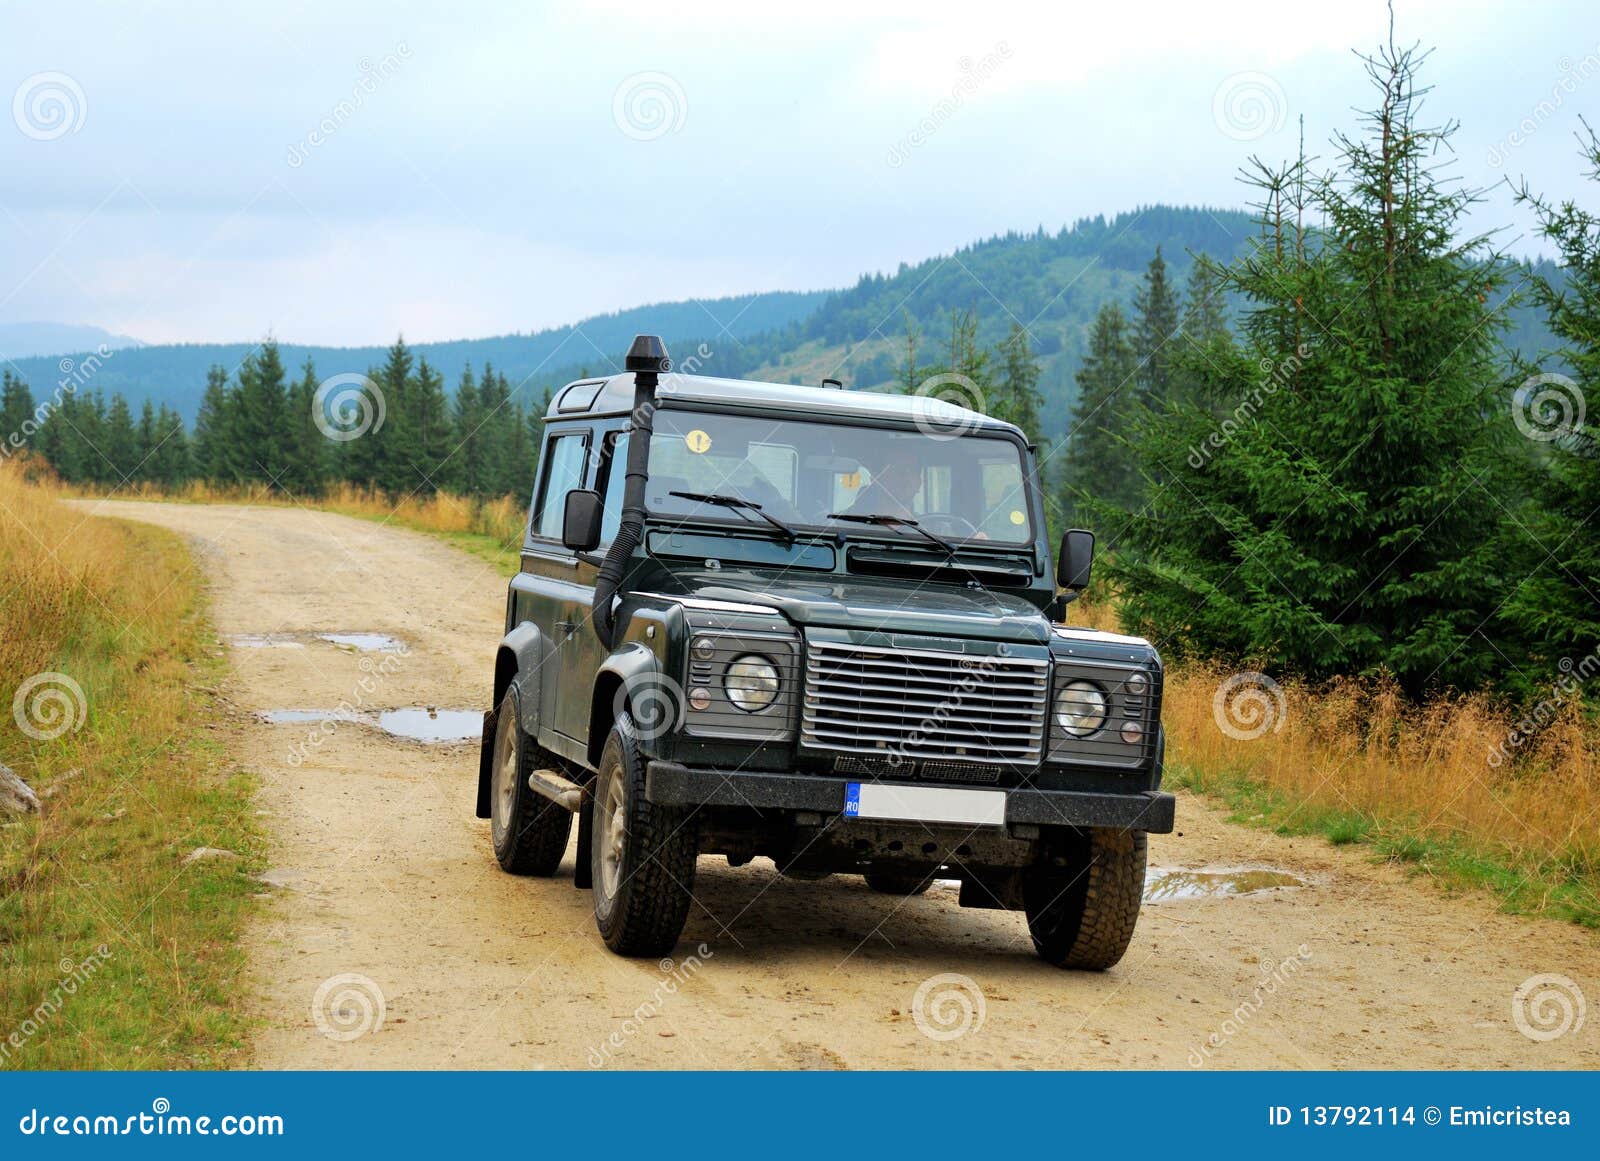 land rover, unpaved road